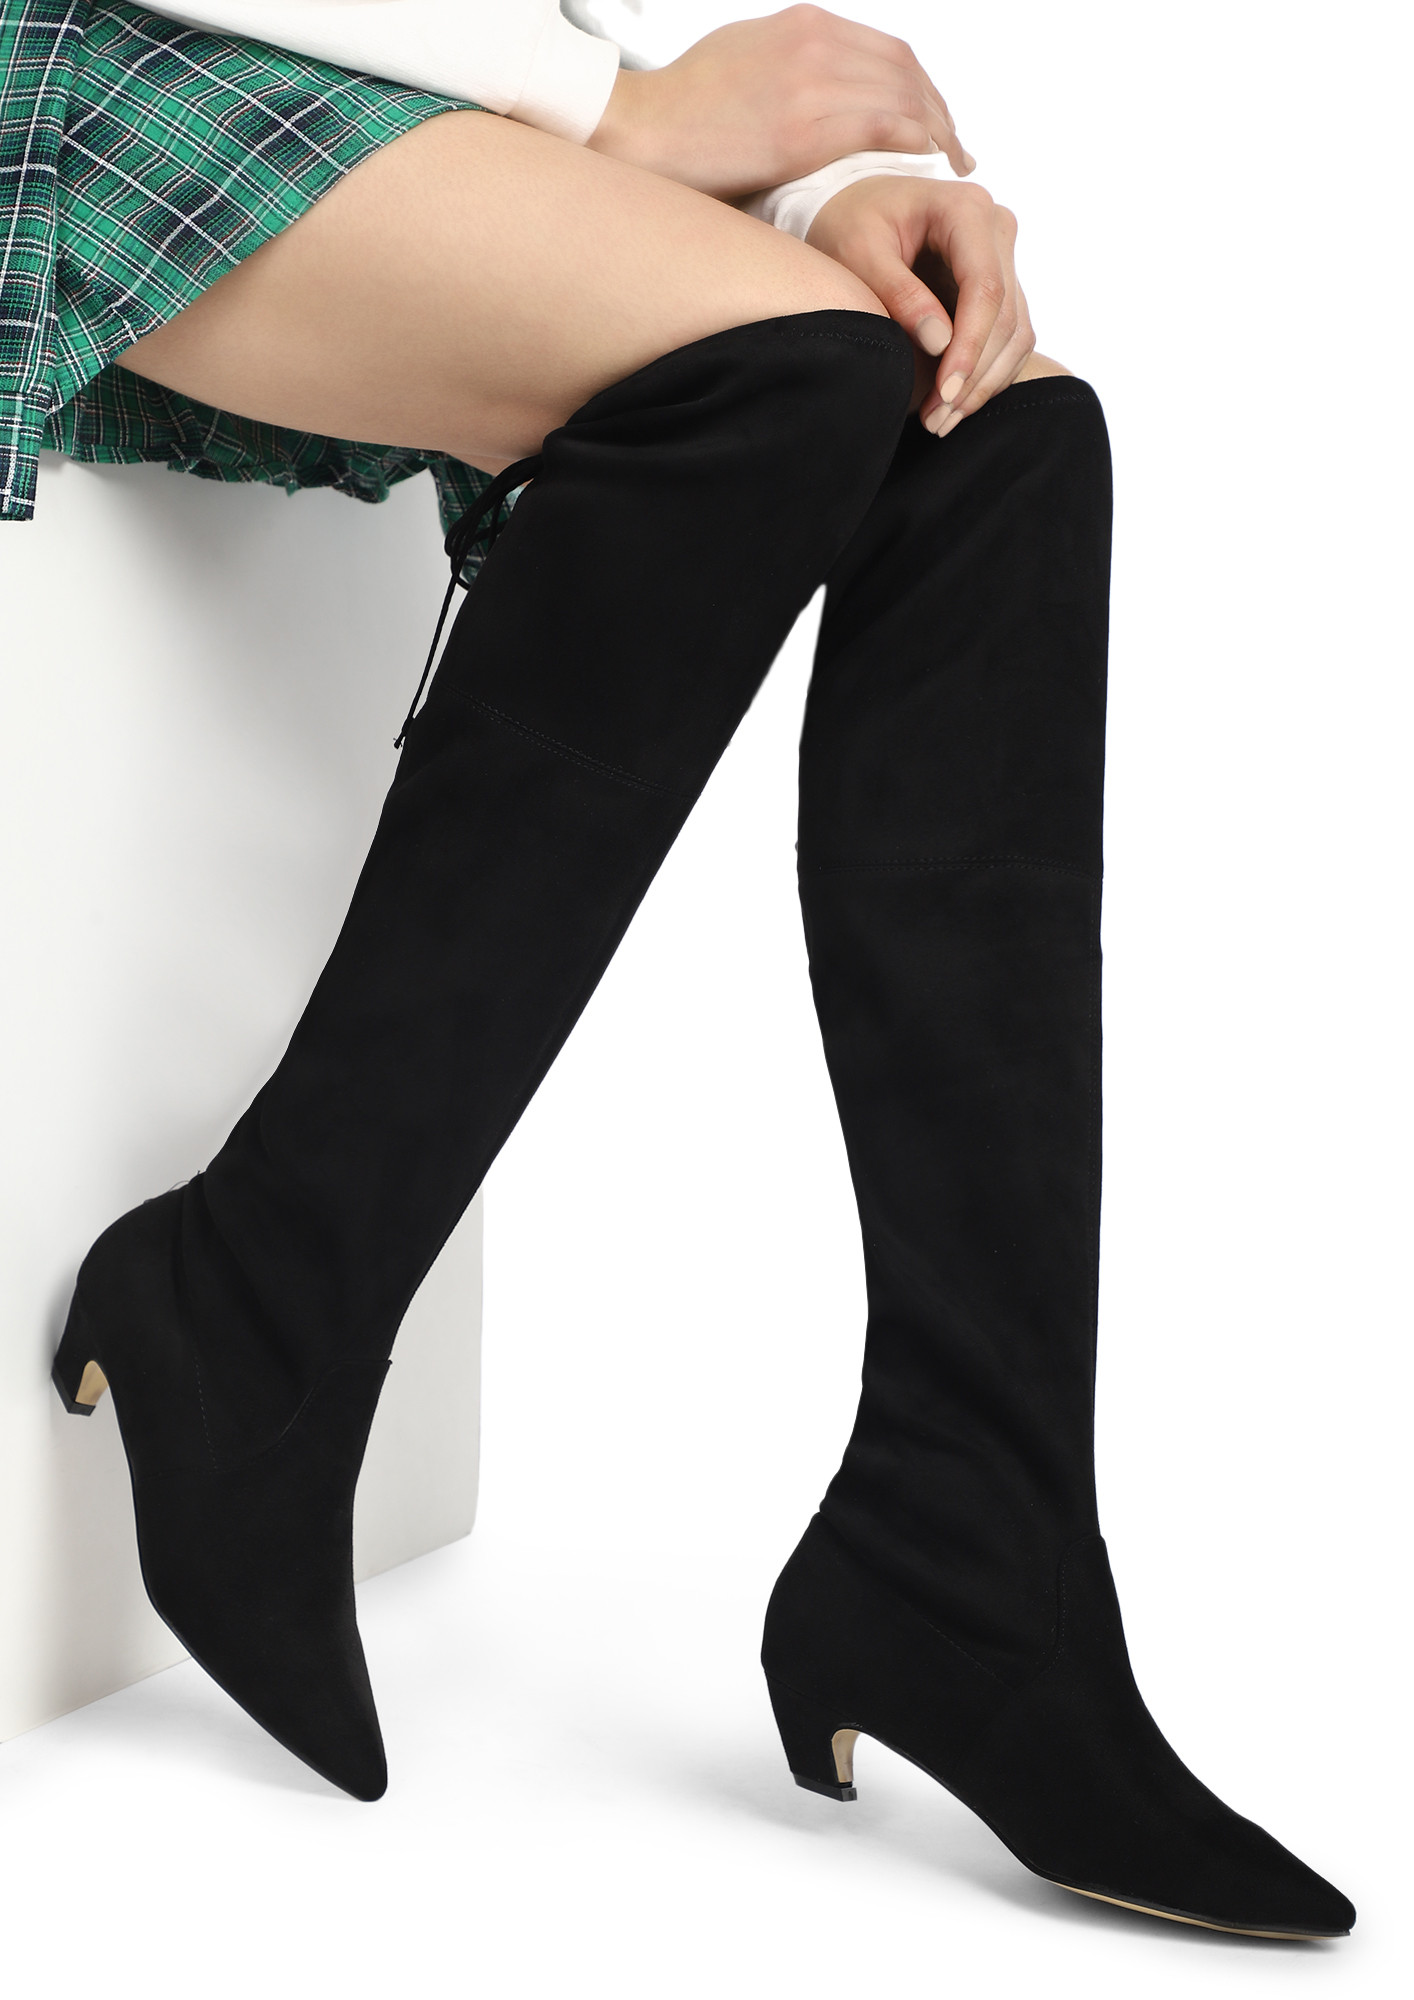 LEARNING CURVES BLACK KNEE-HIGH BOOTS